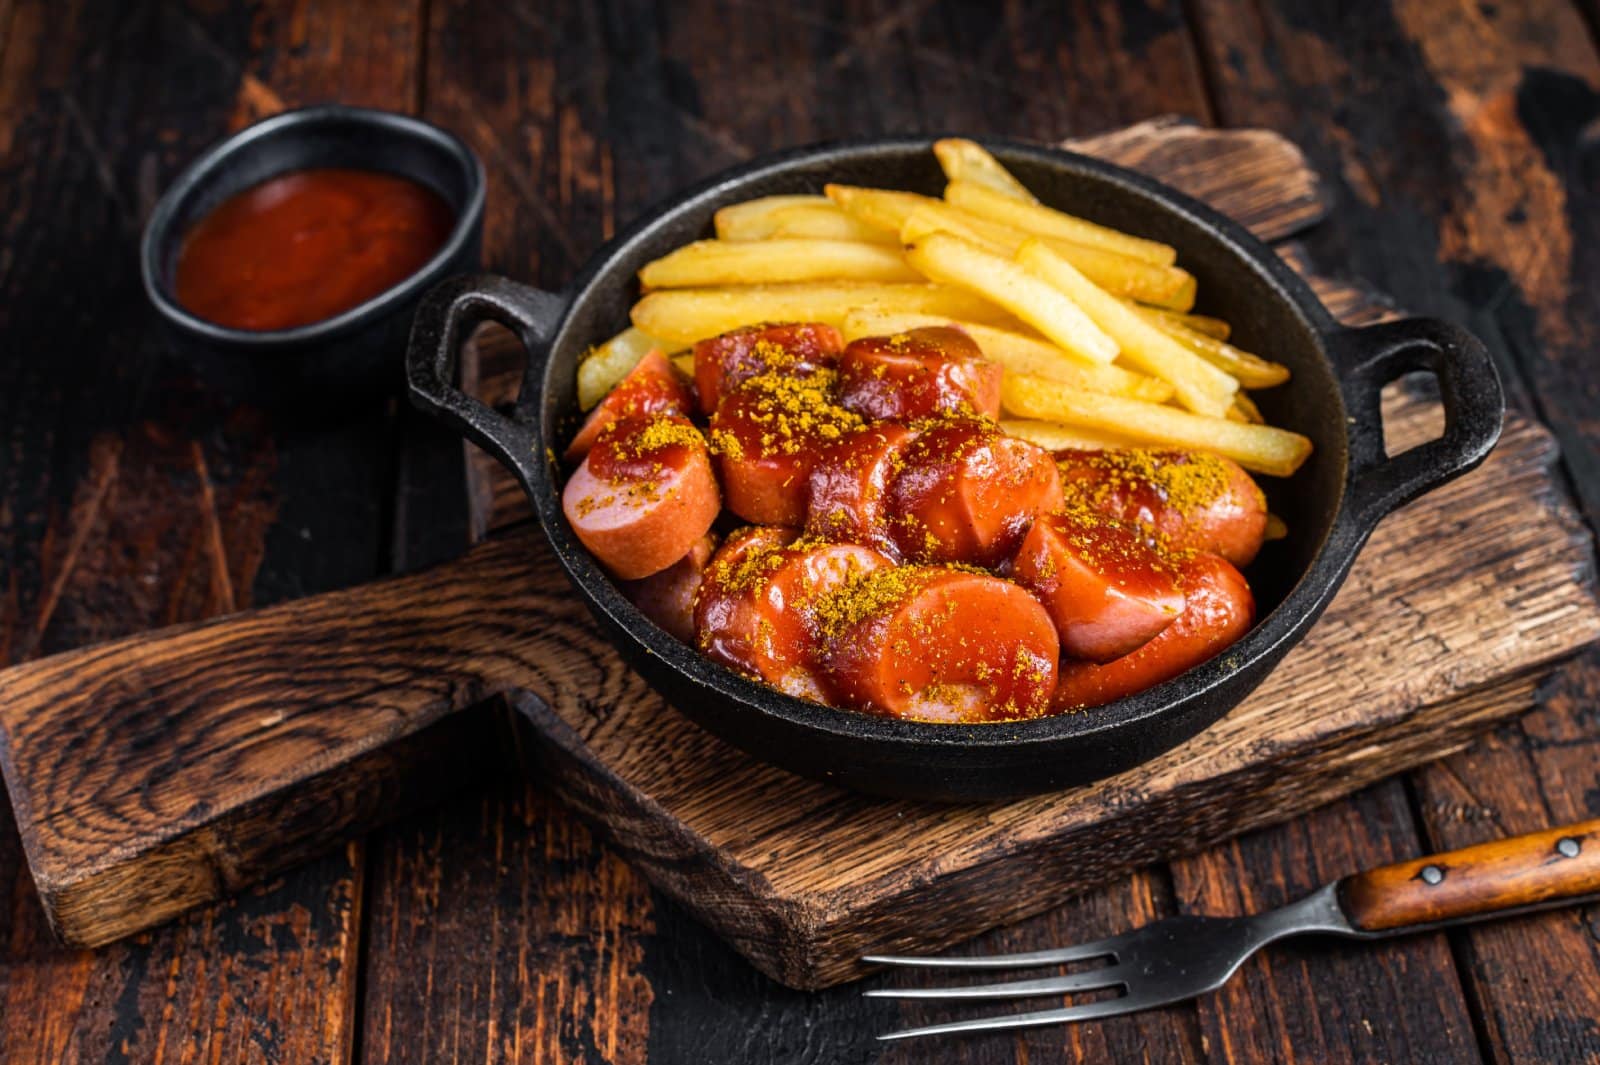 <p class="wp-caption-text">Image Credit: Shutterstock / Mironov Vladimir</p>  <p>This beloved German street food, a steamed and fried pork sausage cut into slices and doused in curry ketchup, costs around €2.50 ($2.95) in Berlin. A similar dish outside of Germany could be upwards of $7, lacking the authentic Berlin flair.</p>